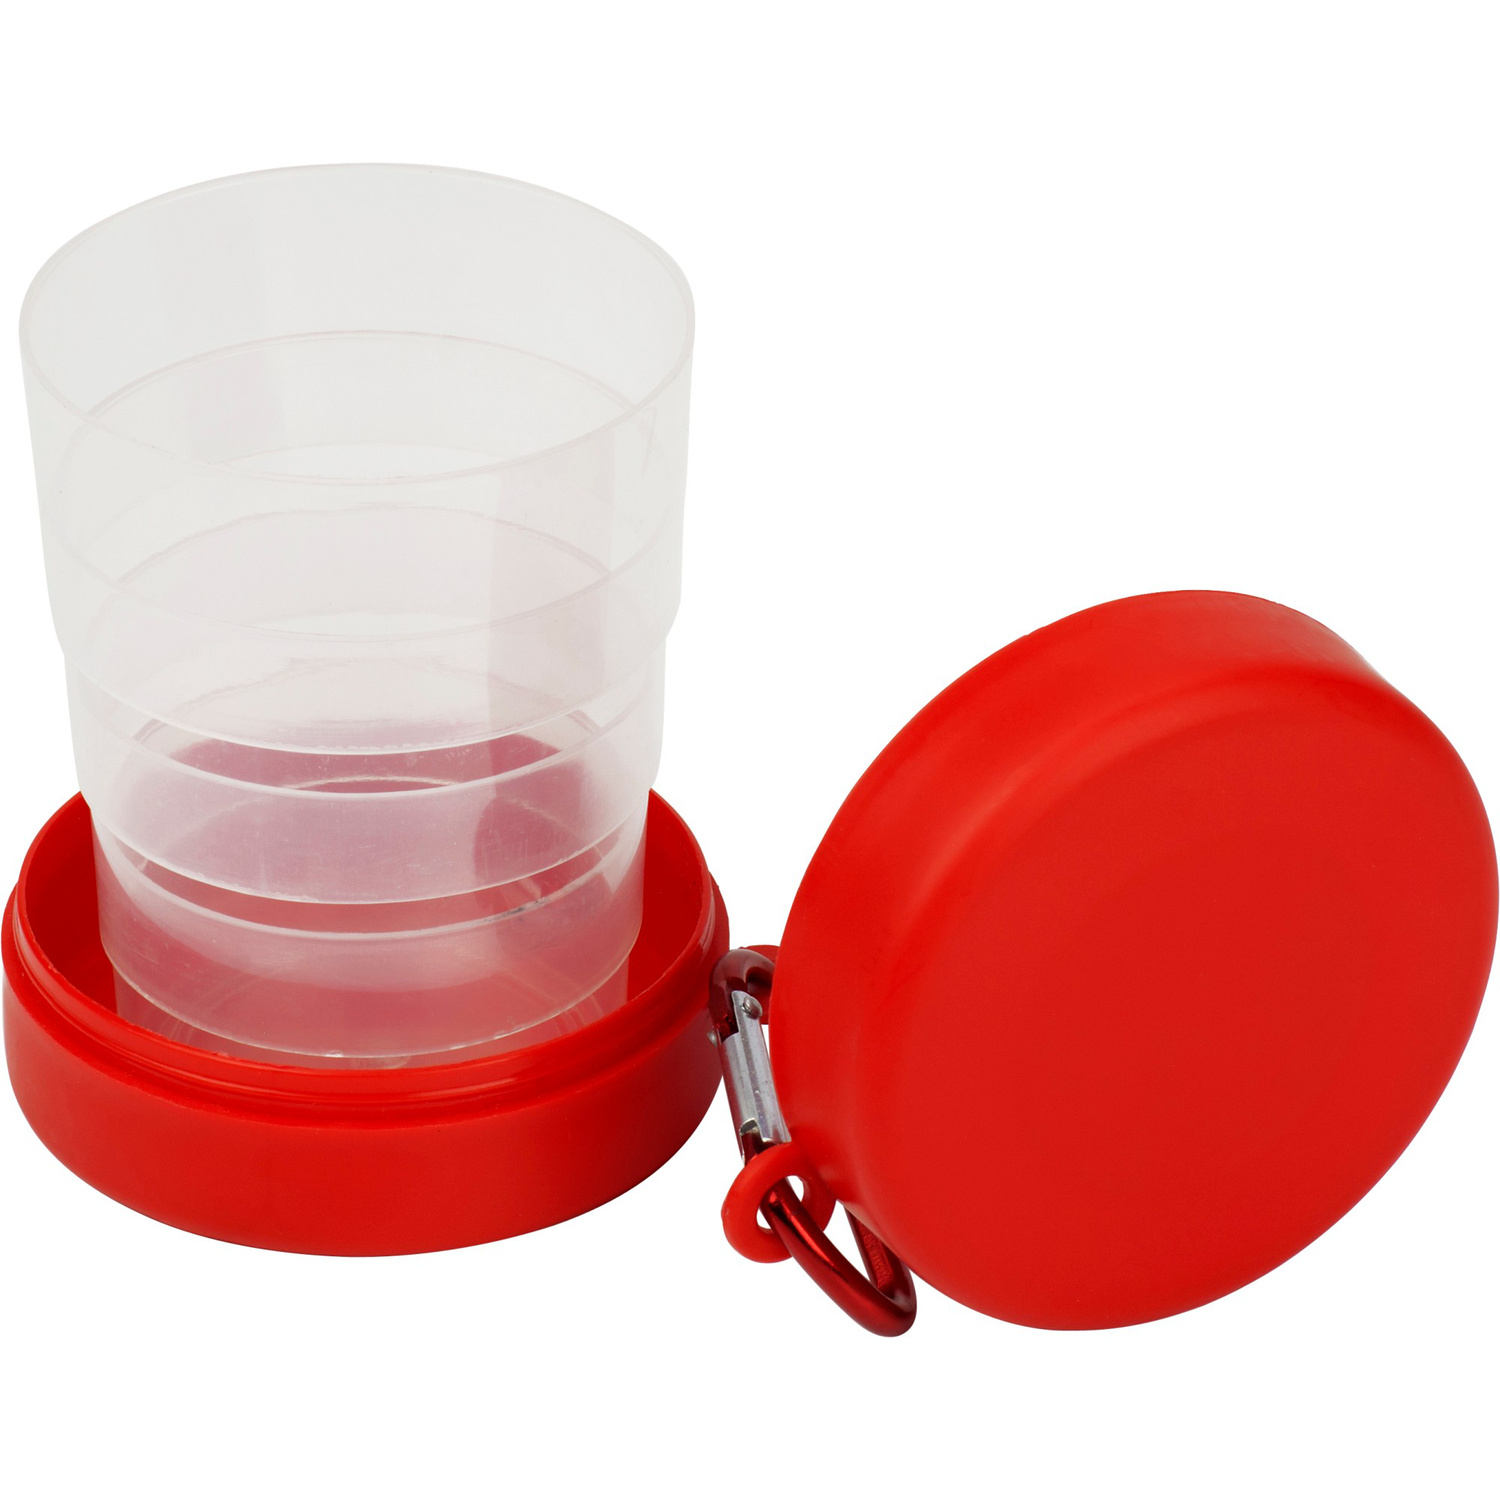 003878 008999999 3d090 ins pro01 fal - Plastic collapsible cup (220ml)